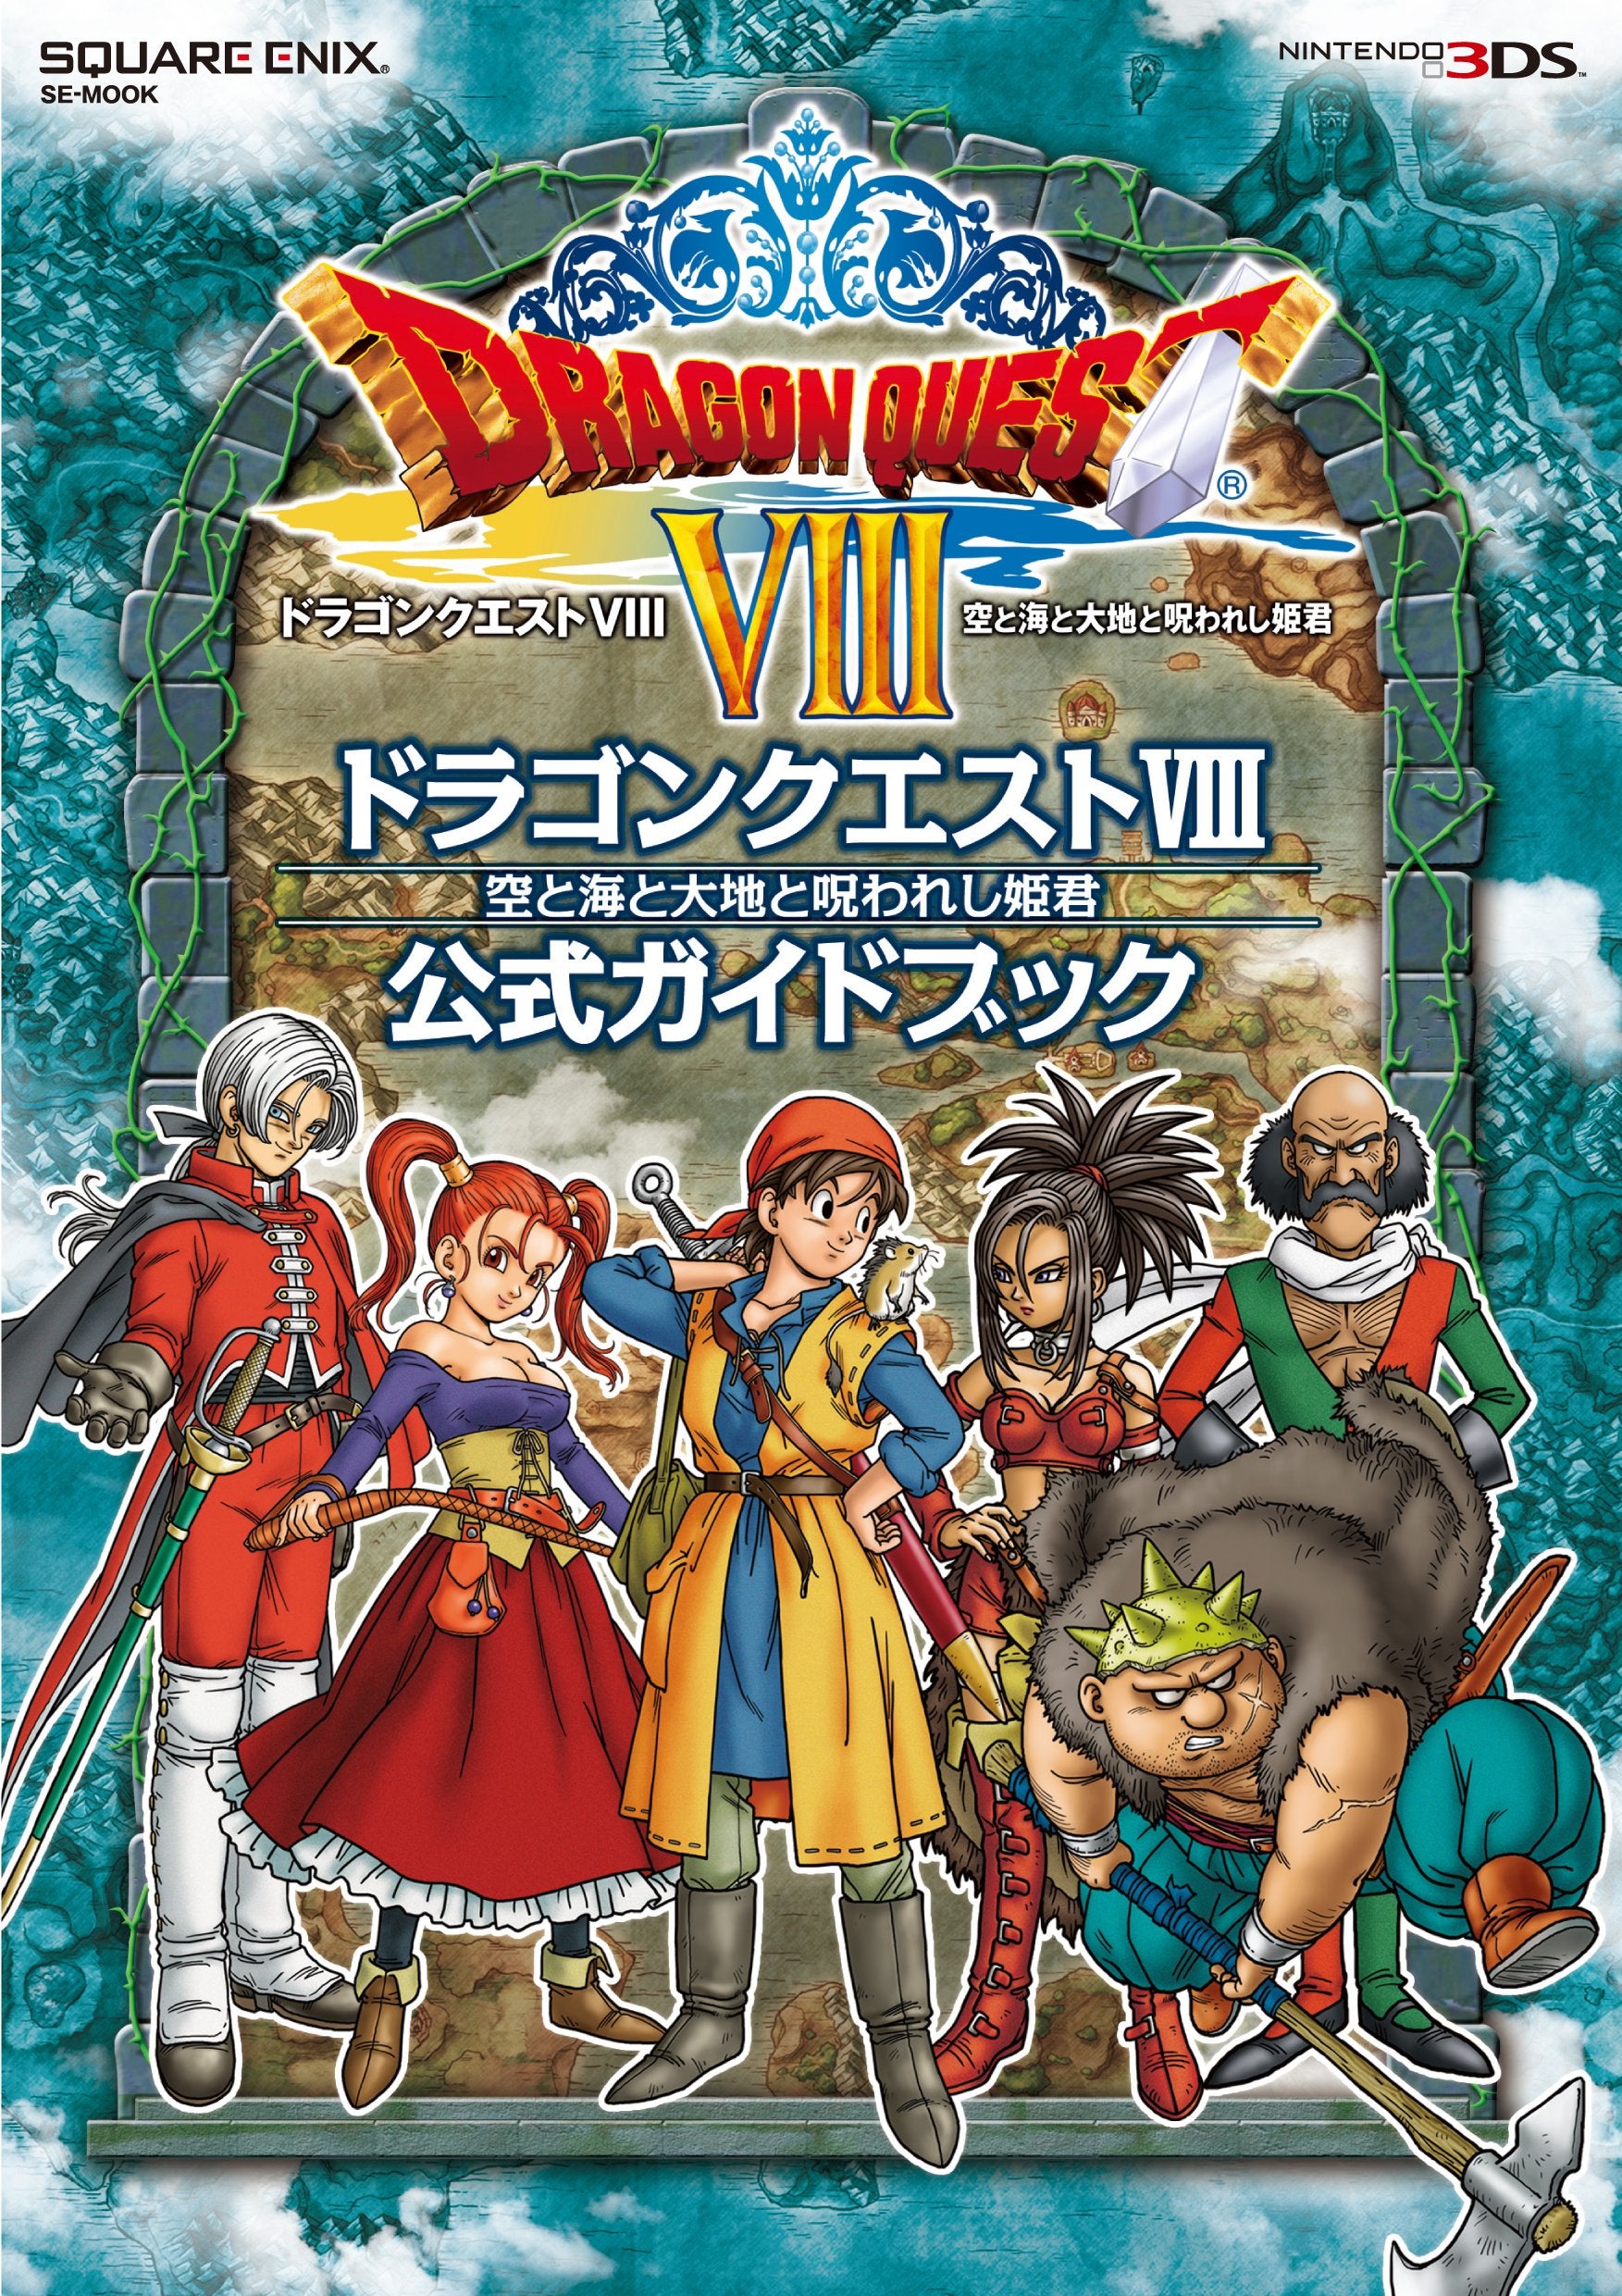 Dragon Quest 8 on 3DS delayed to next year - Polygon